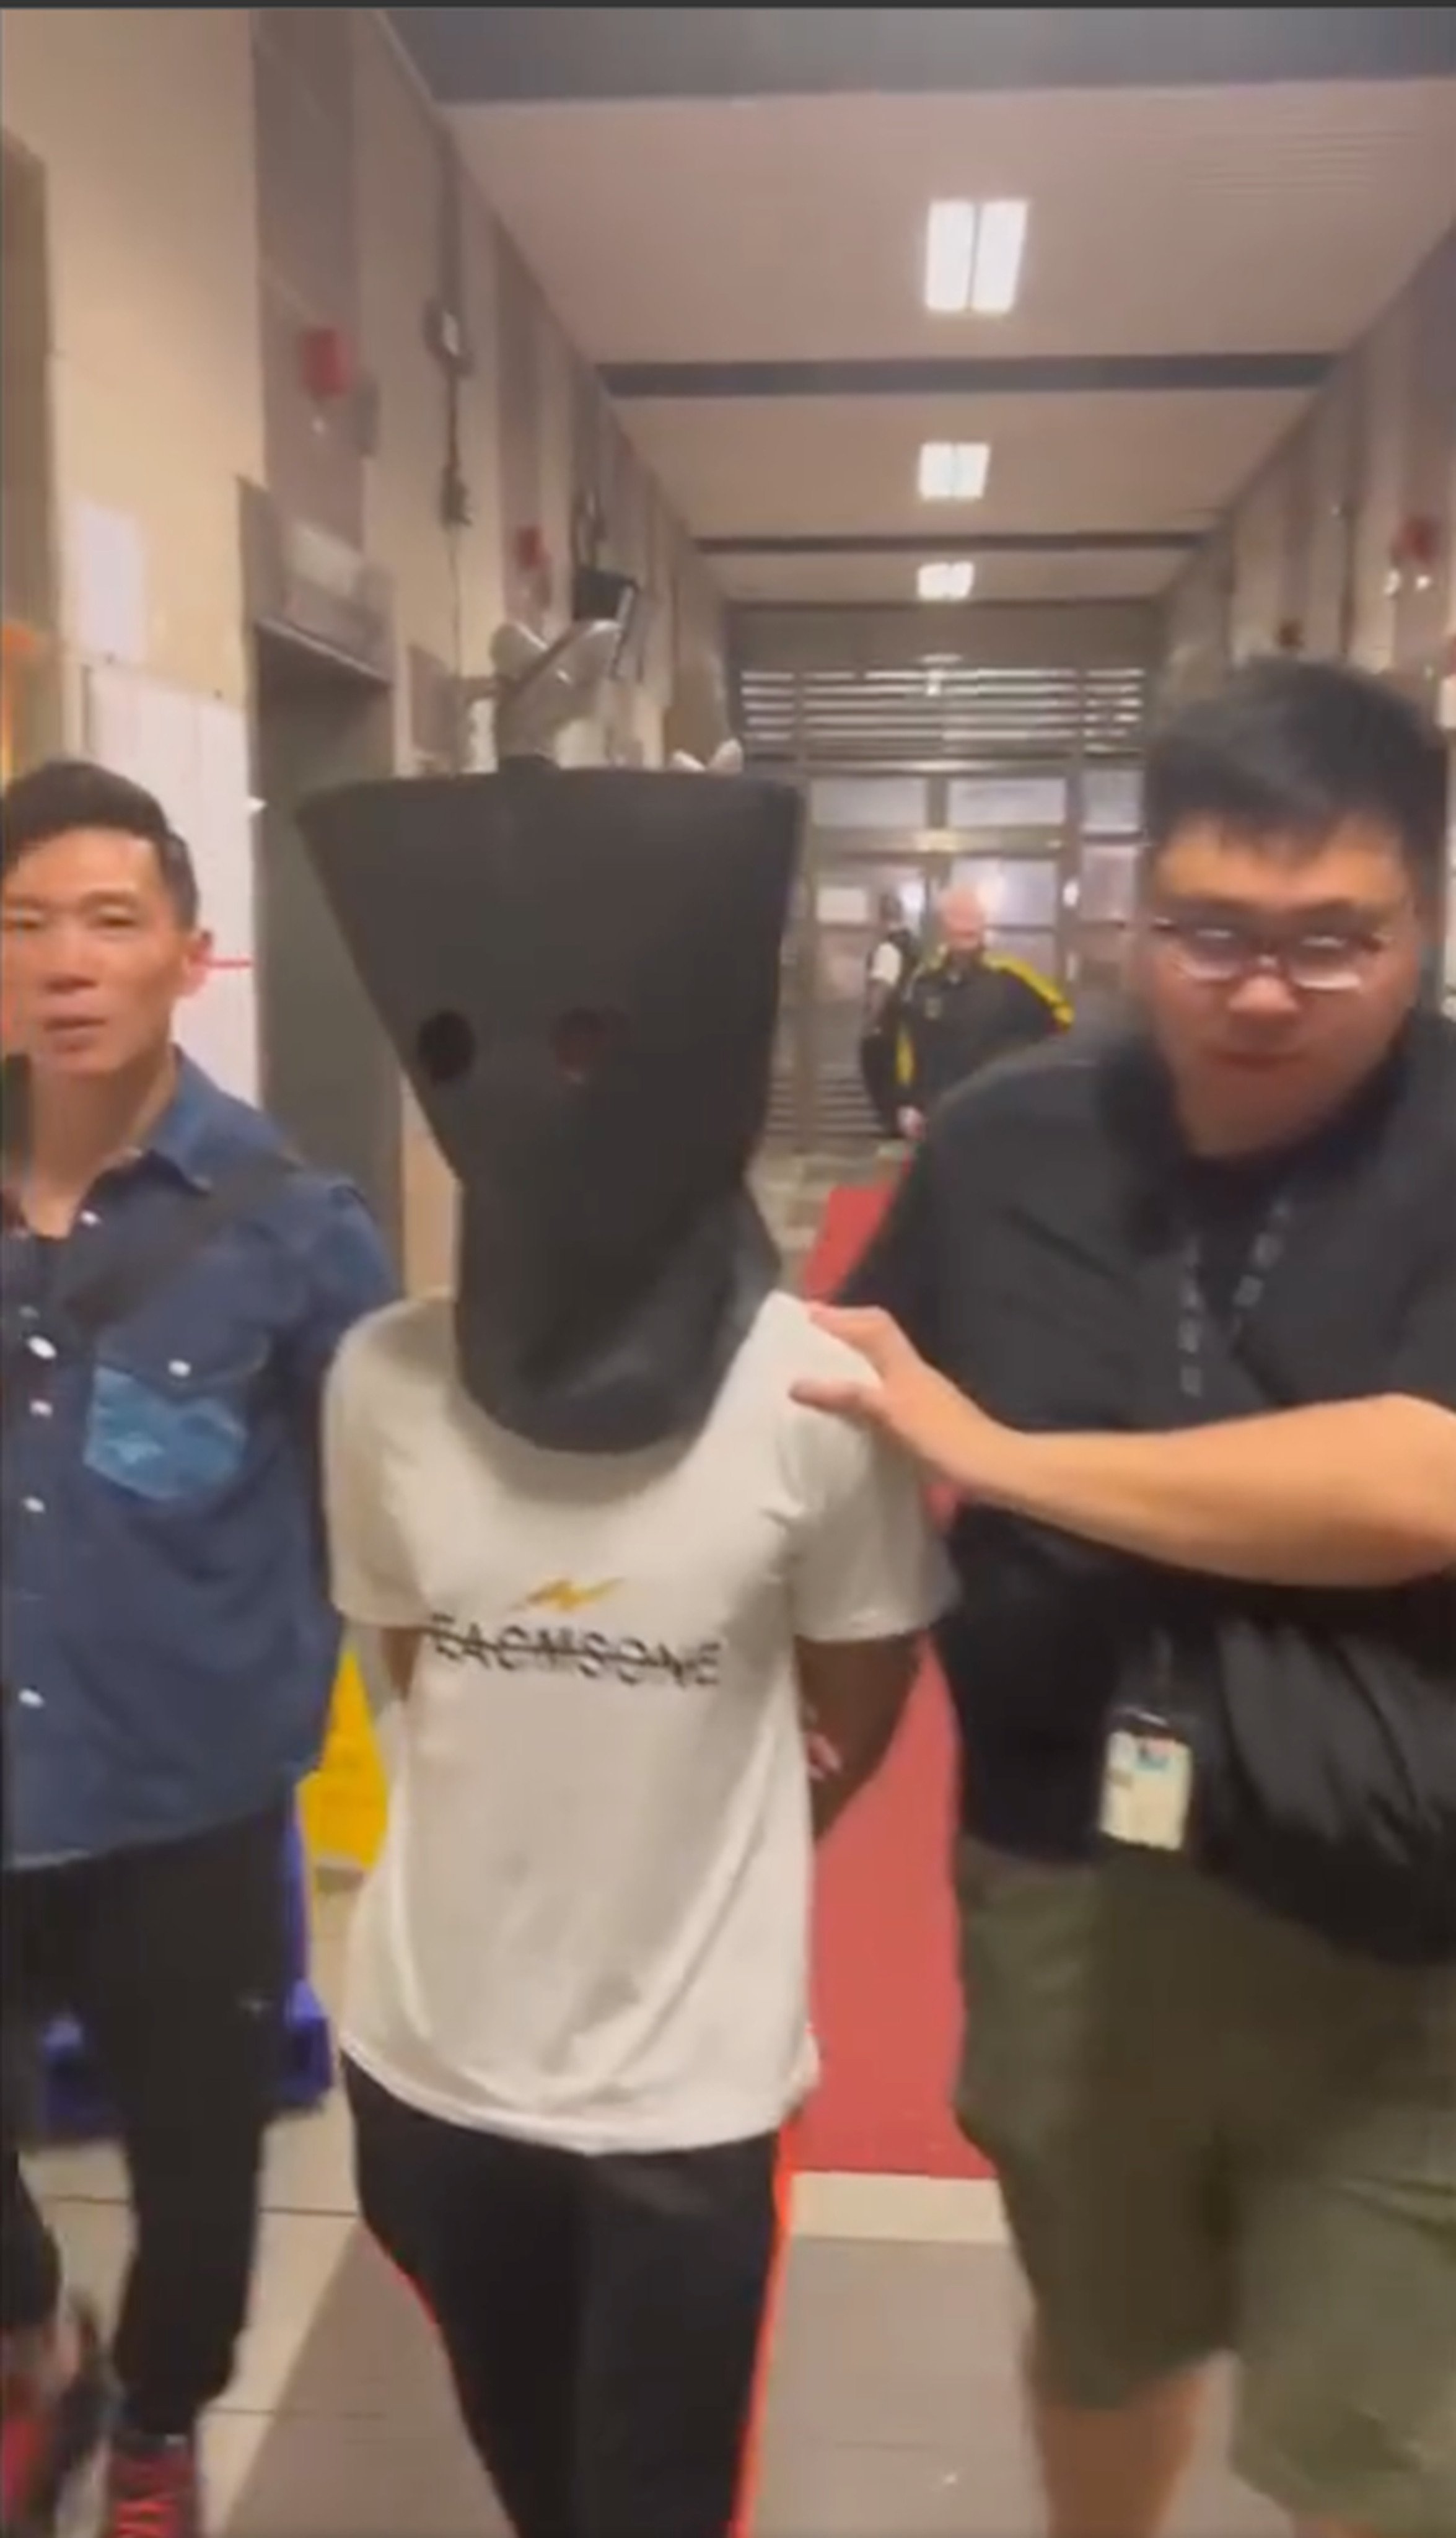 The suspect was arrested after police saw water-filled bags being hurled at children from atop an estate building. Photo: Facebook/Hong Kong Police